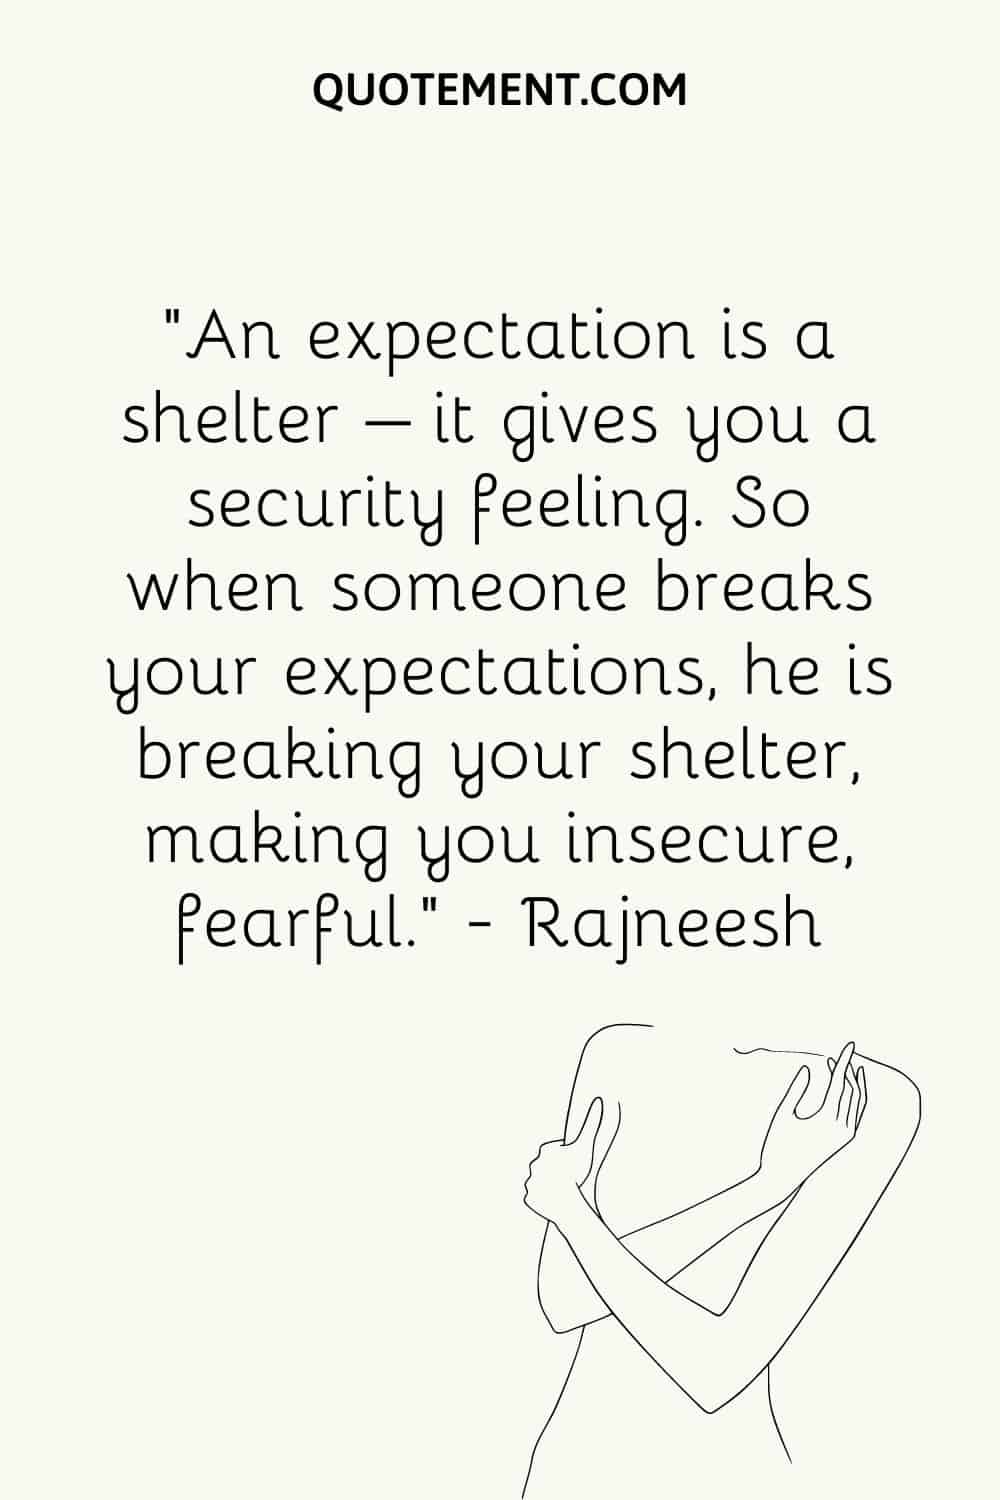 An expectation is a shelter – it gives you a security feeling